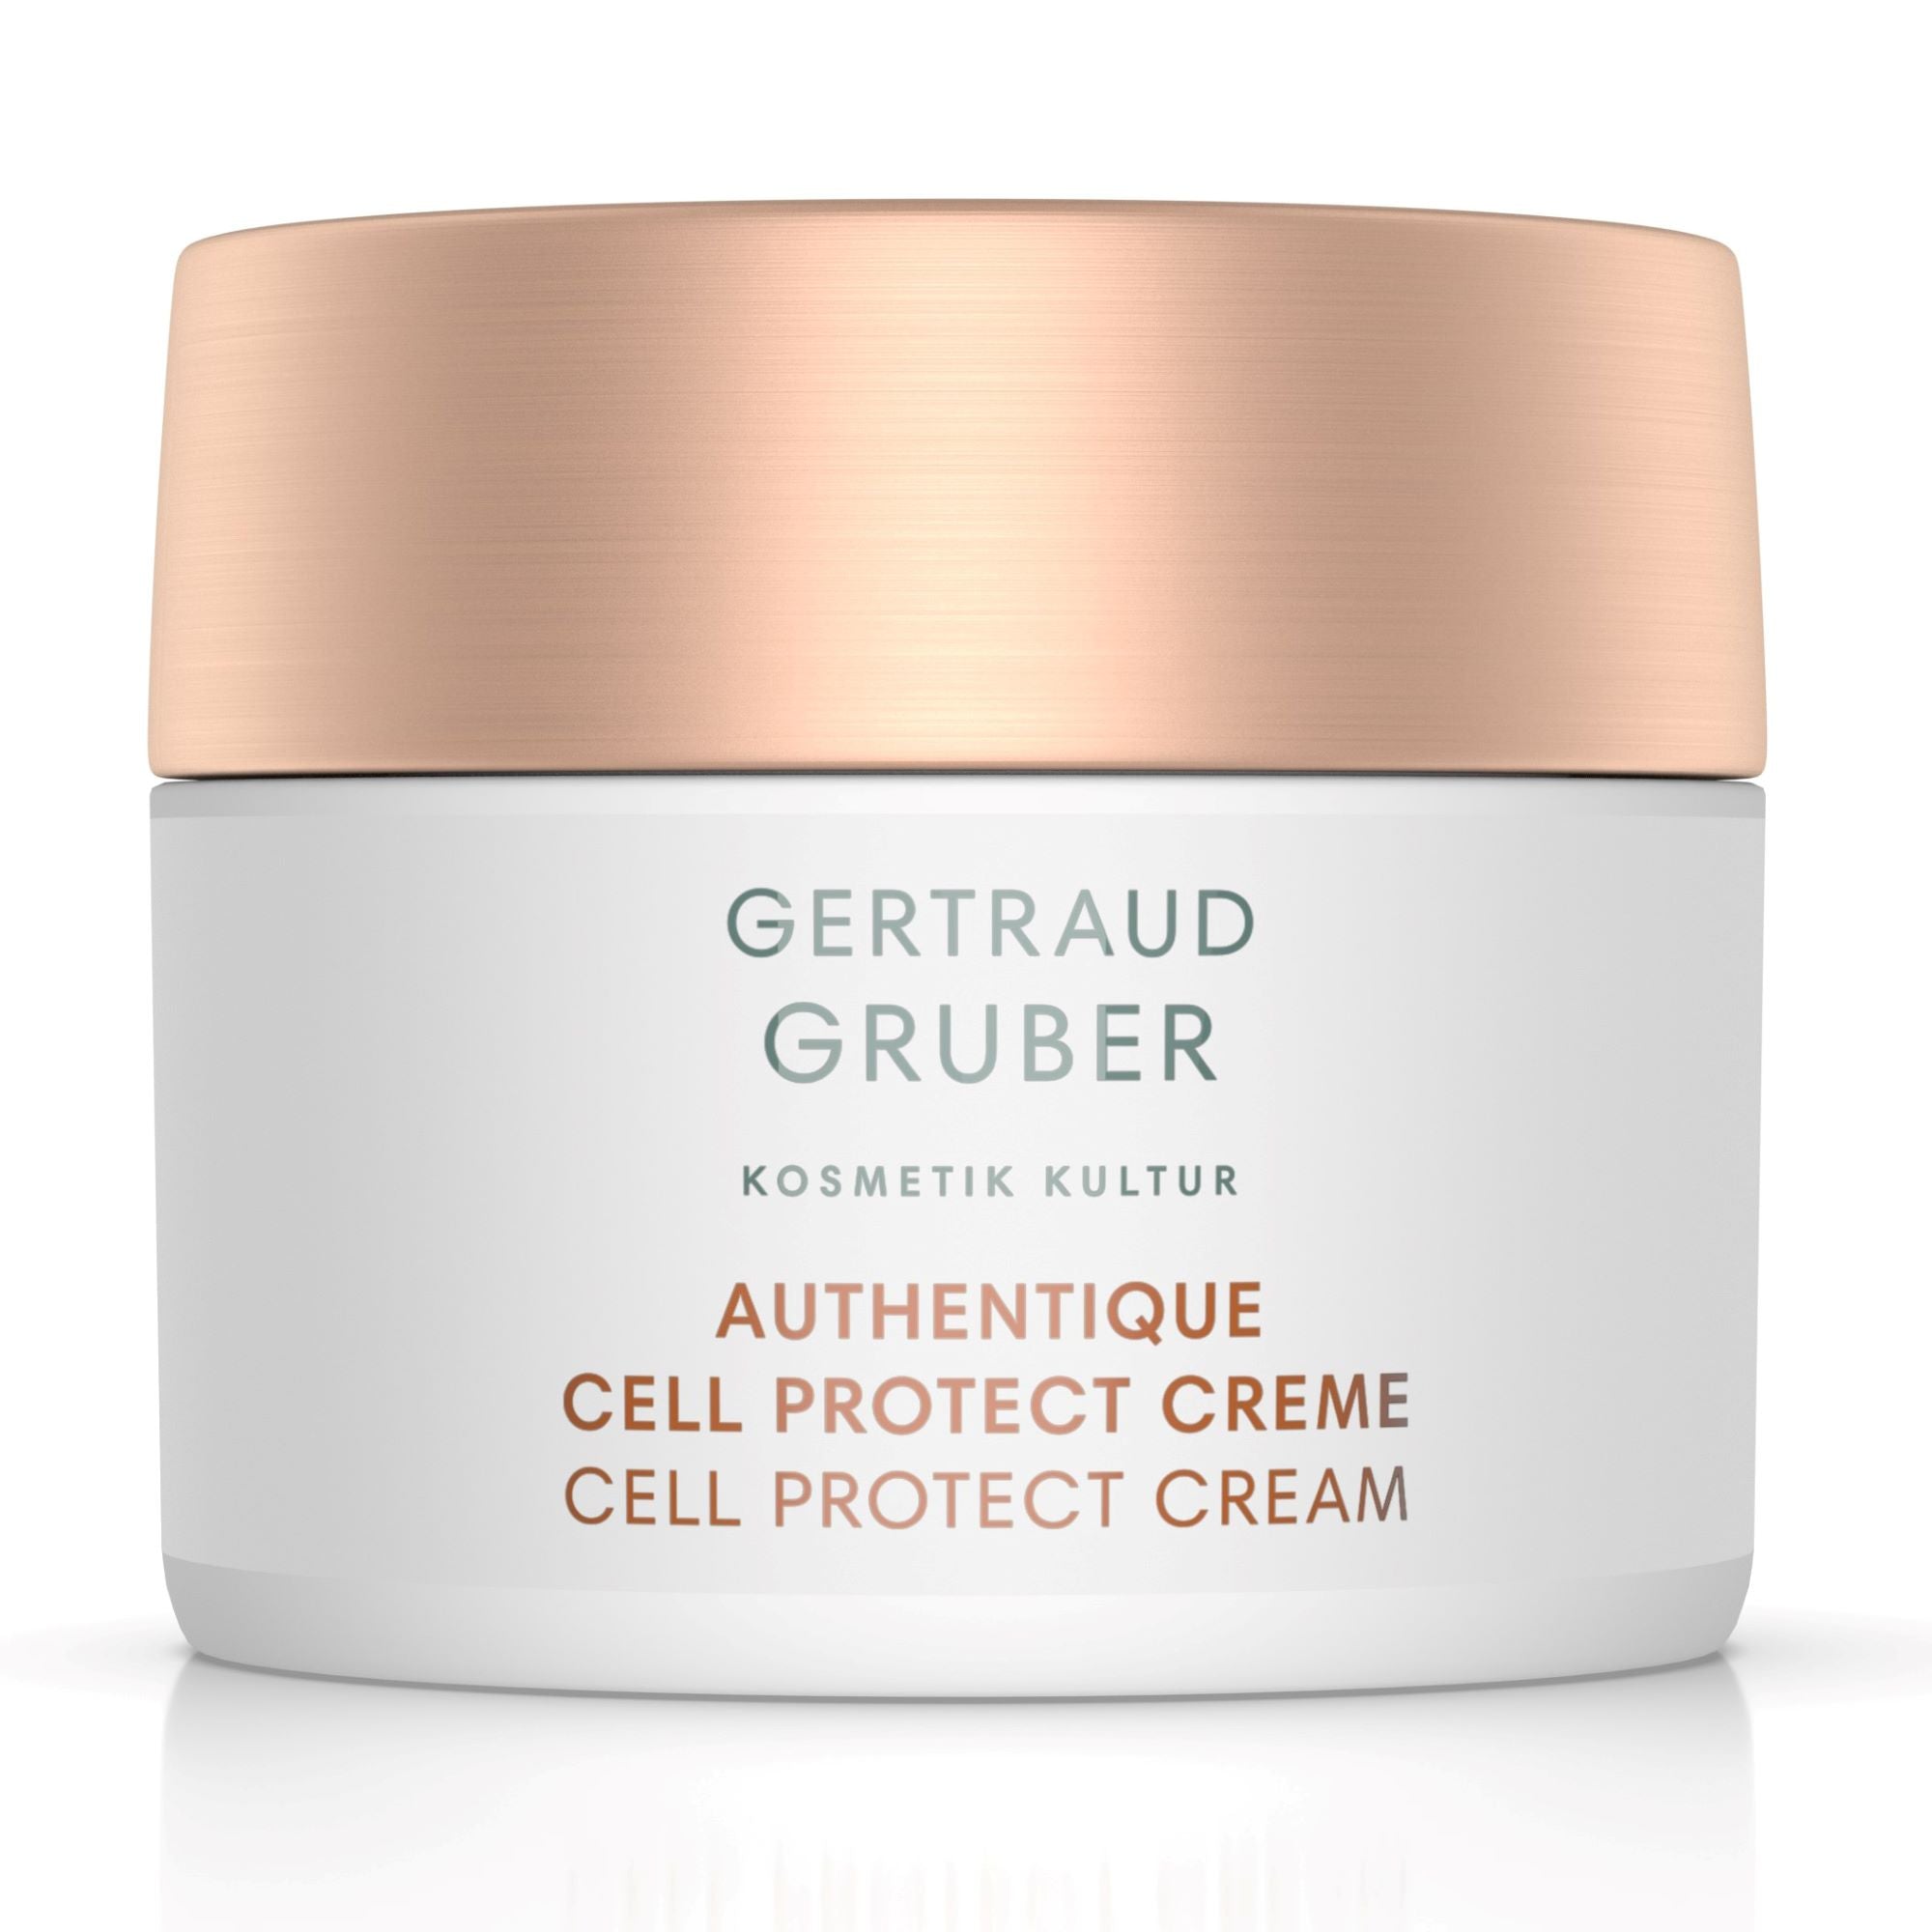 Gertraud Gruber AUTHENTIQUE Cell Protect Creme (50ml)